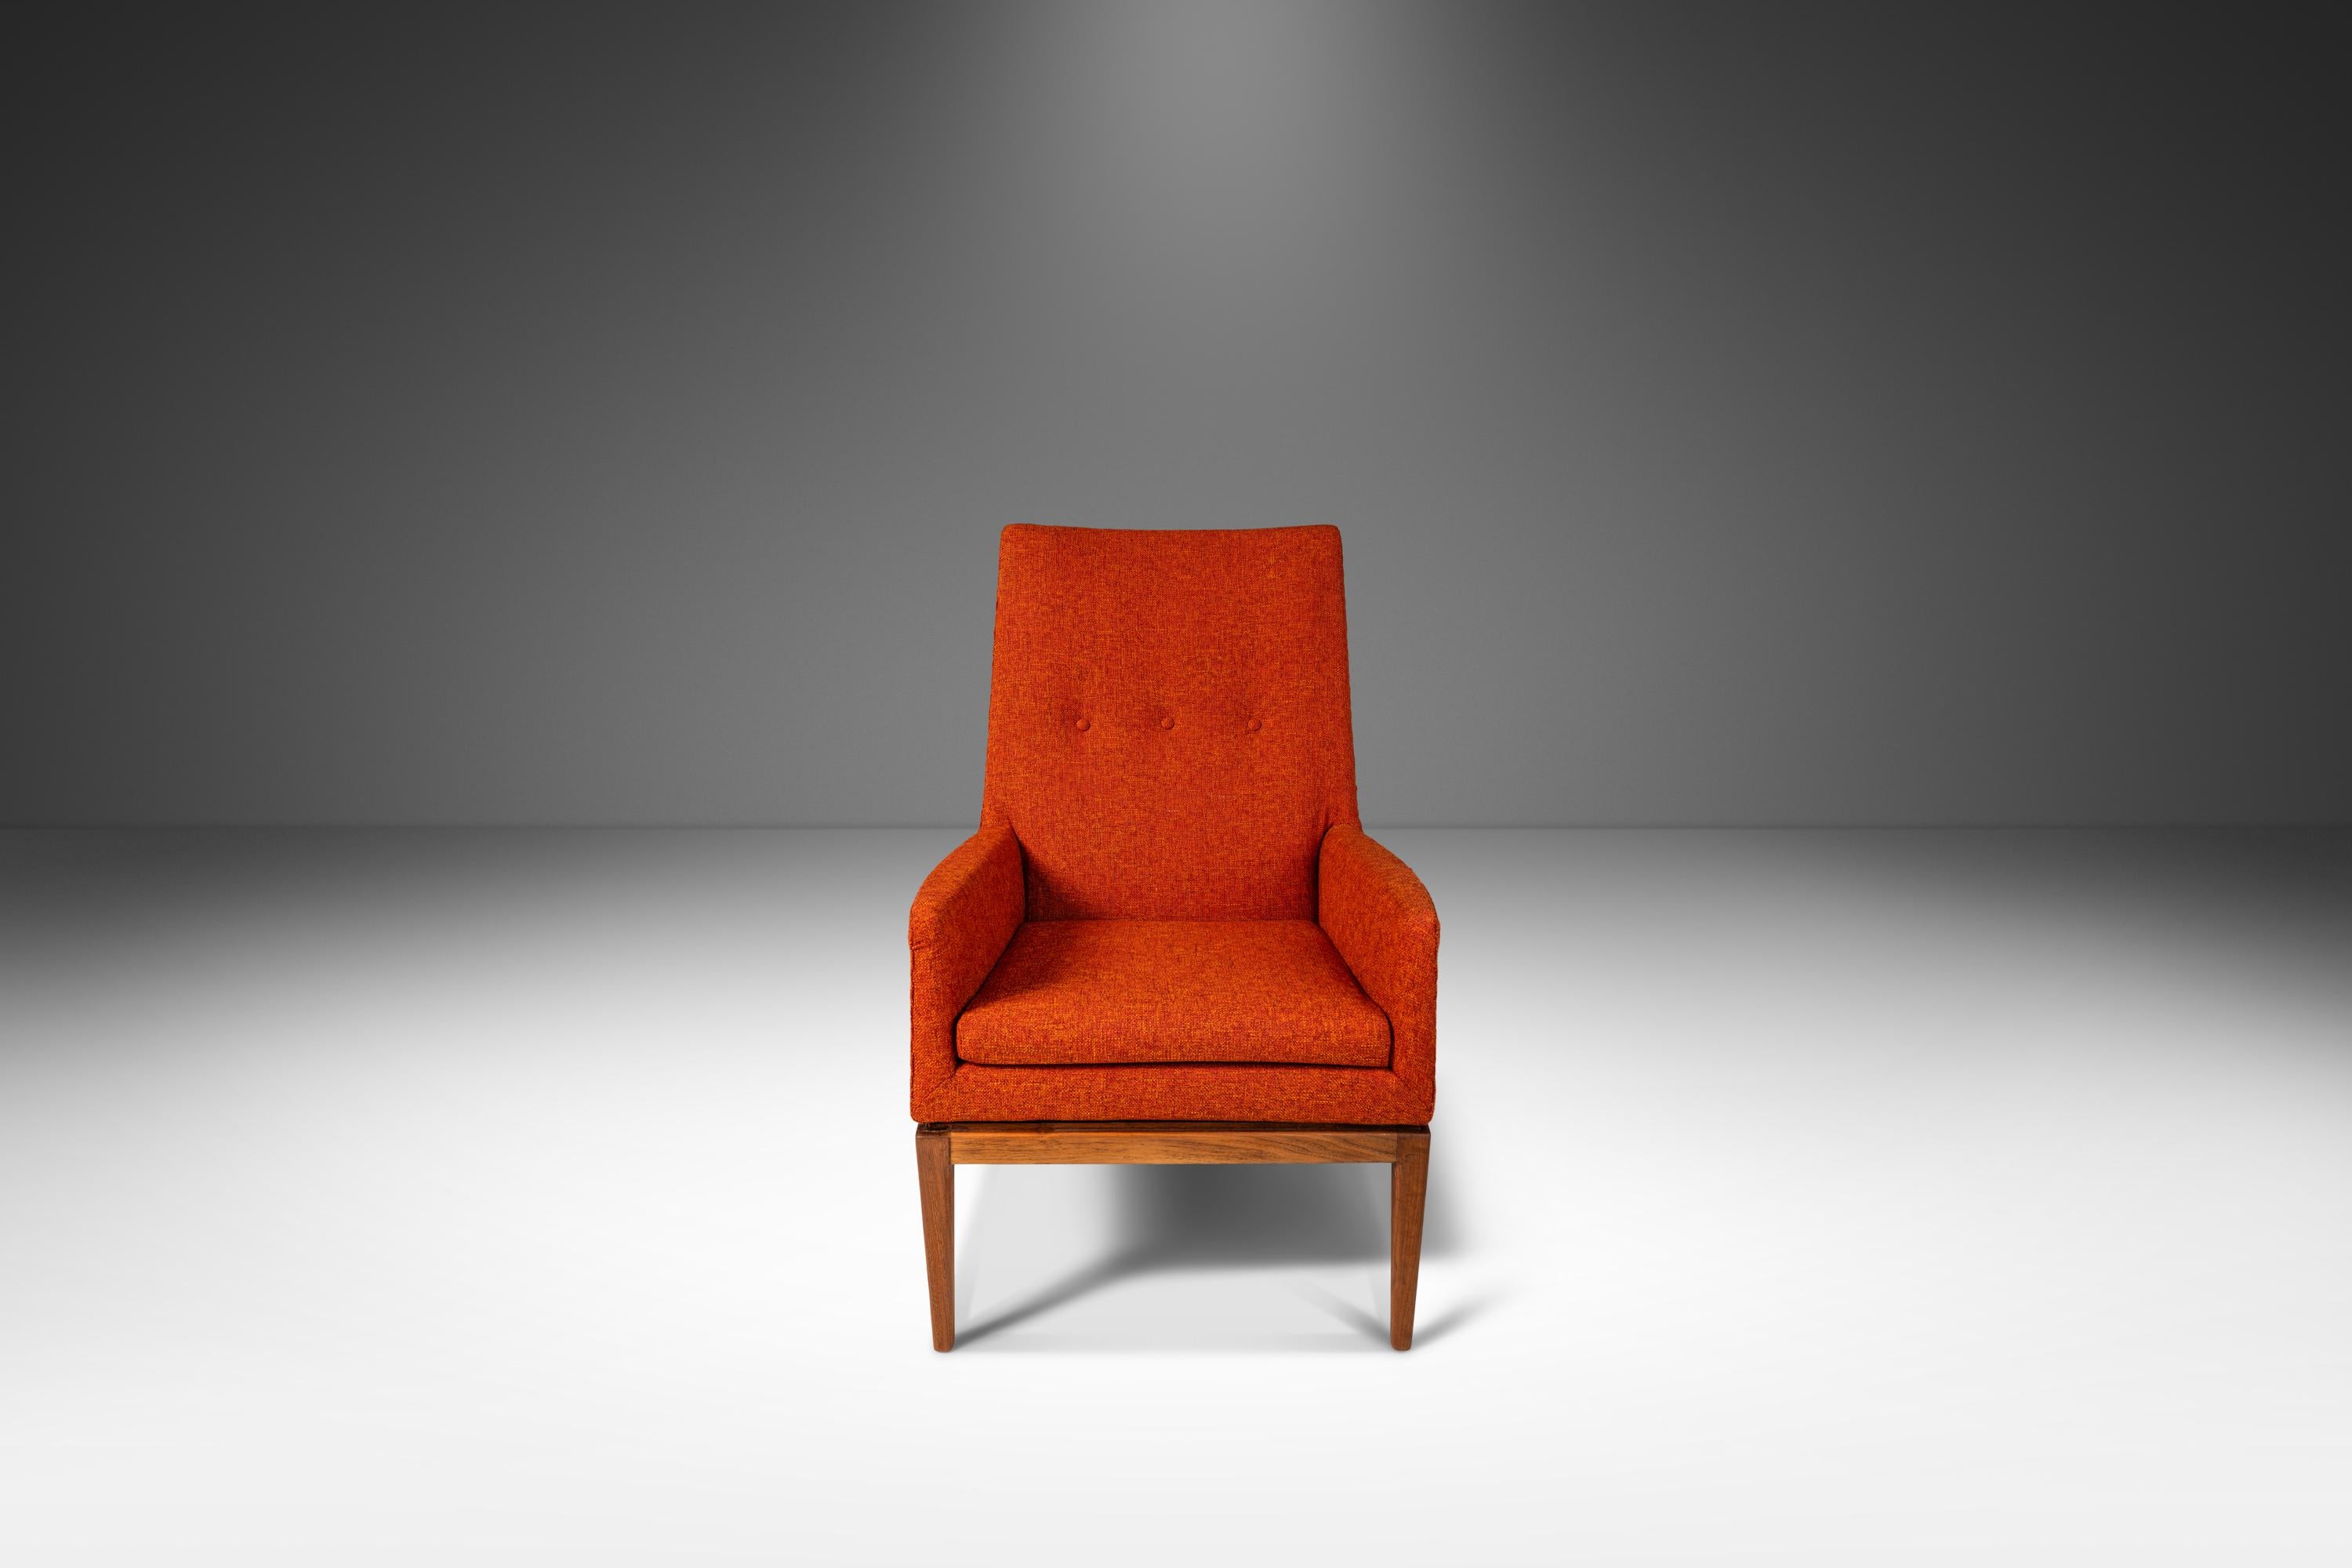 Introducing a rare, fully restored Model 1140 high-back lounge chair designed by the influential Jens Risom. This iconic 1140 features new upholstery, redone in a fabulous vintage-styled heavy weight burnt orange tweed, which was meticulously sewn